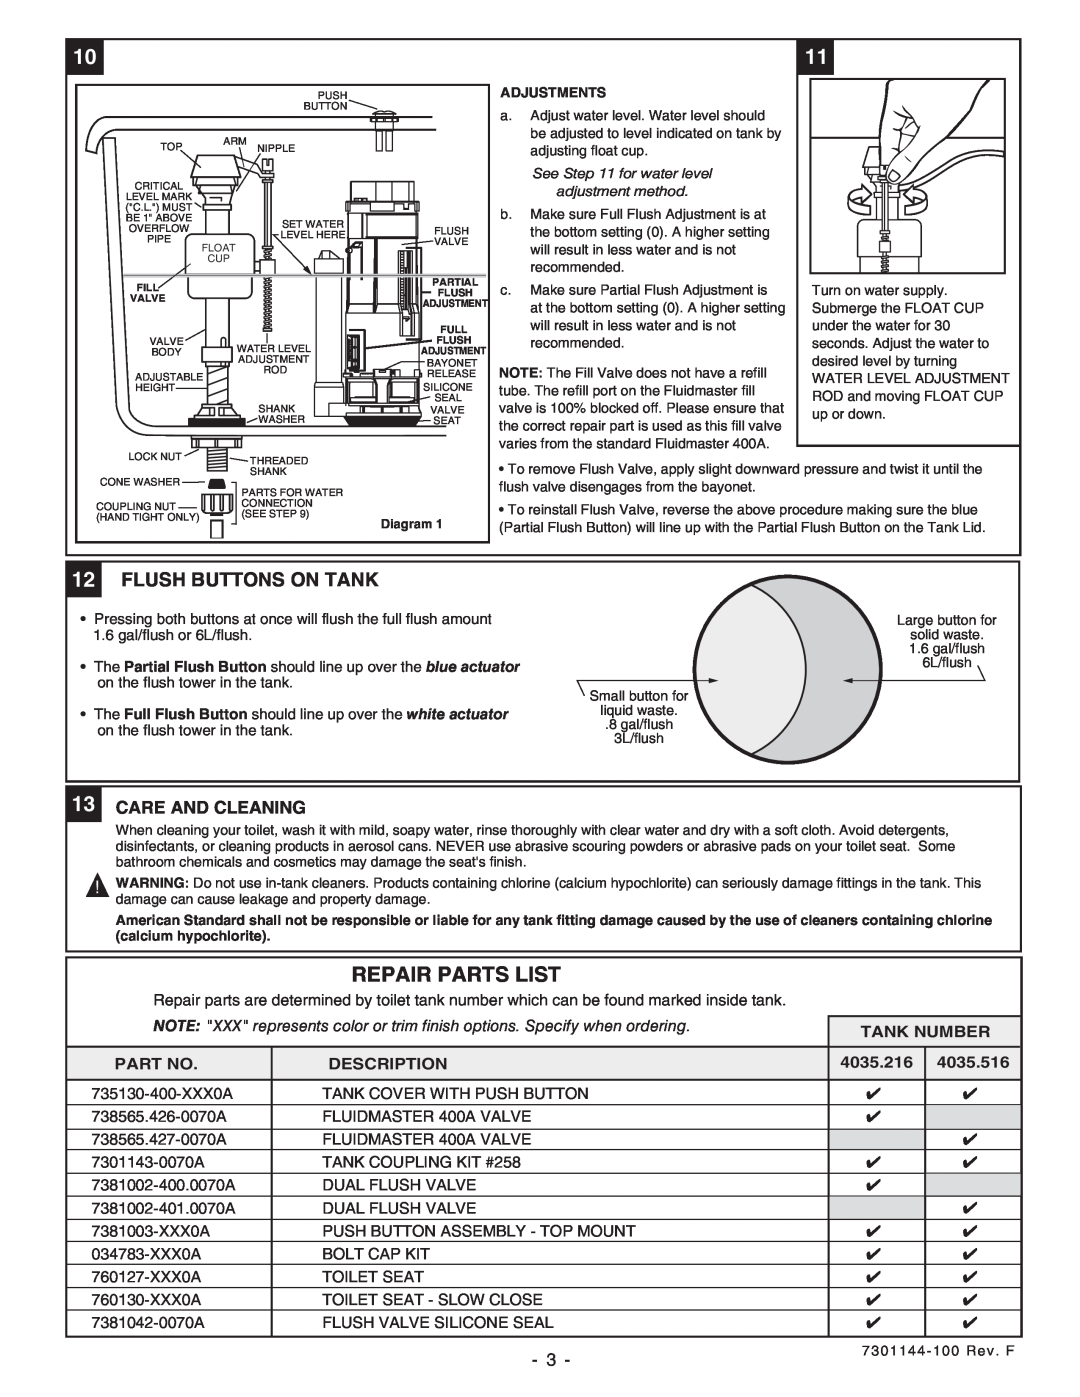 American Standard 2484.516 Repair Parts List, 12FLUSH BUTTONS ON TANK, Care And Cleaning, Tank Number, Description 